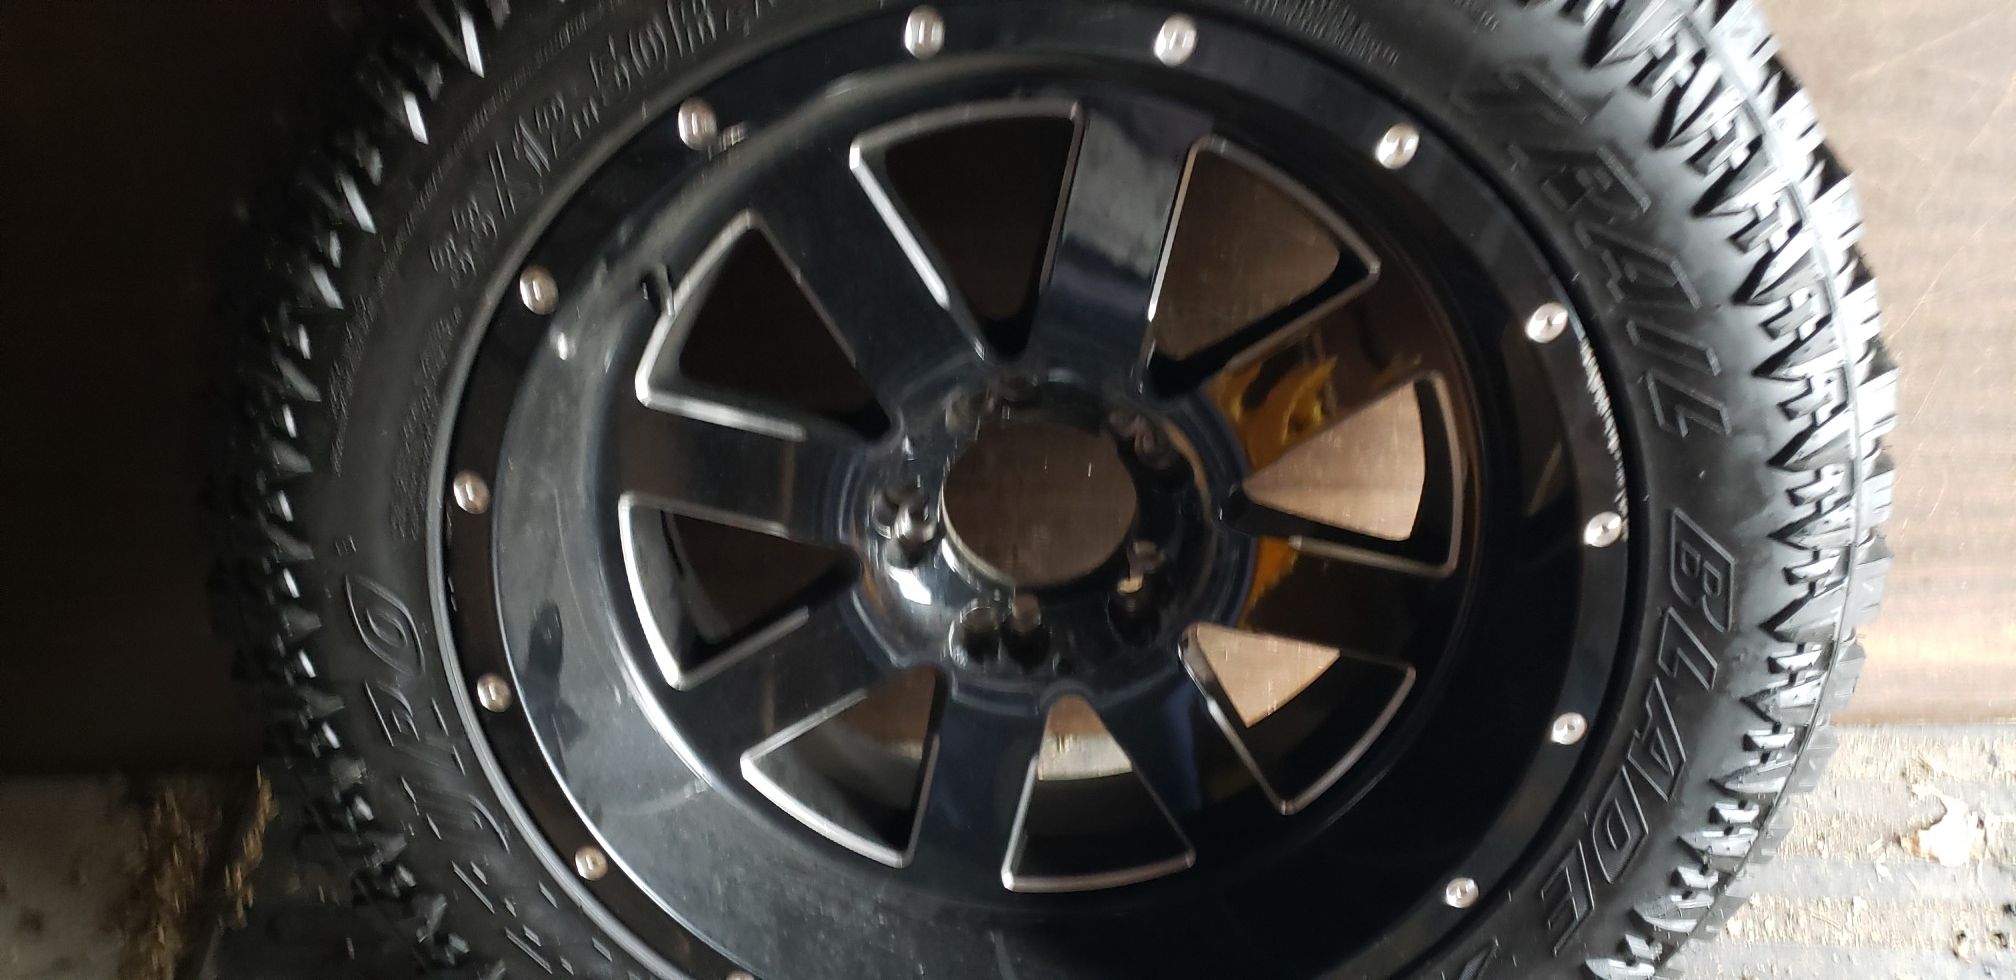 20 inch Toyota rims and tires